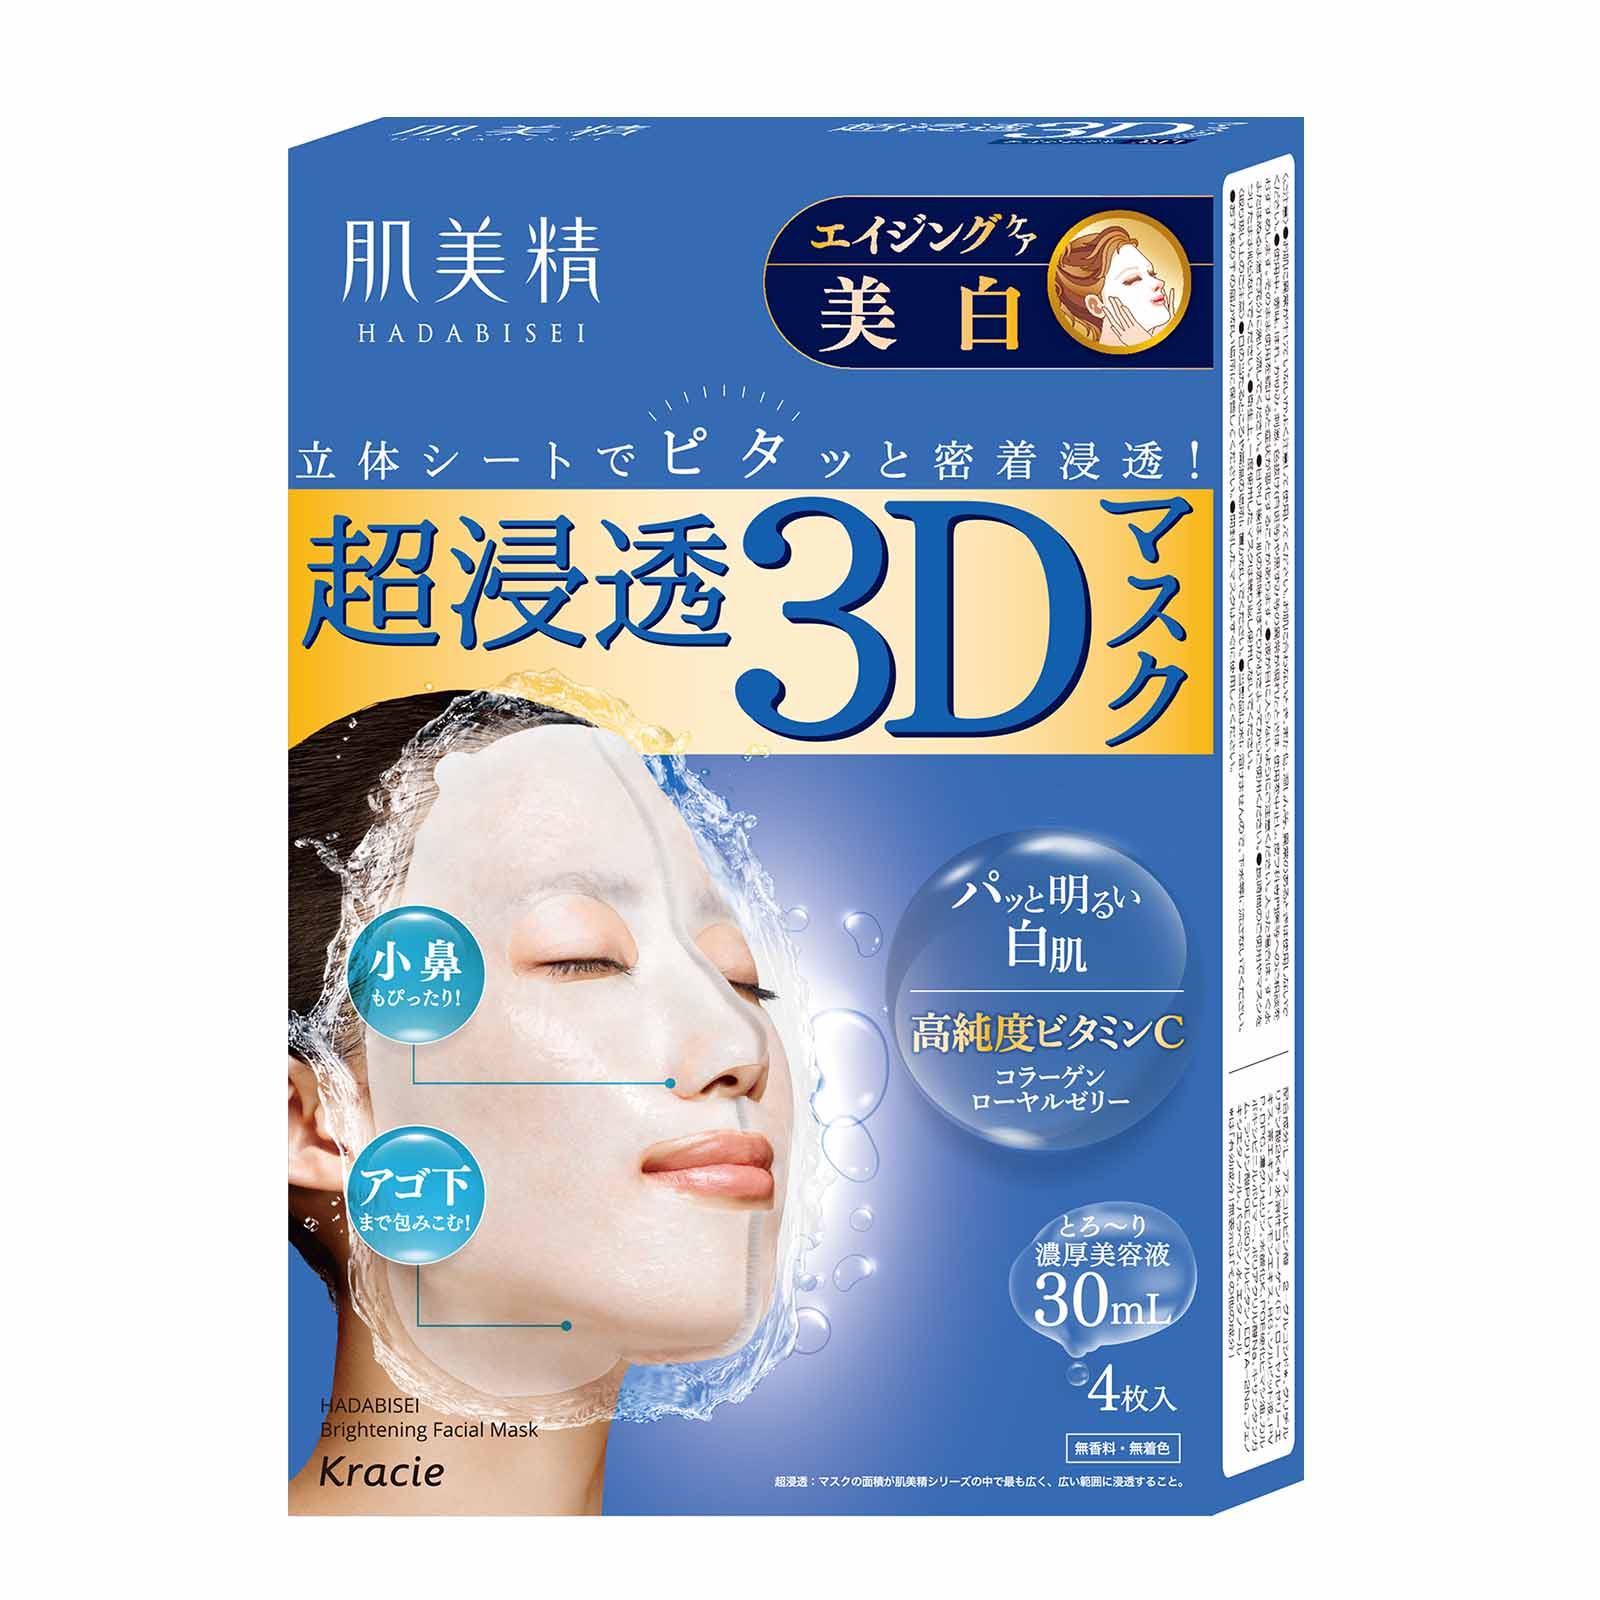 Kracie Hadabisei 3D Facial Mask (Aging Care and Brightening)